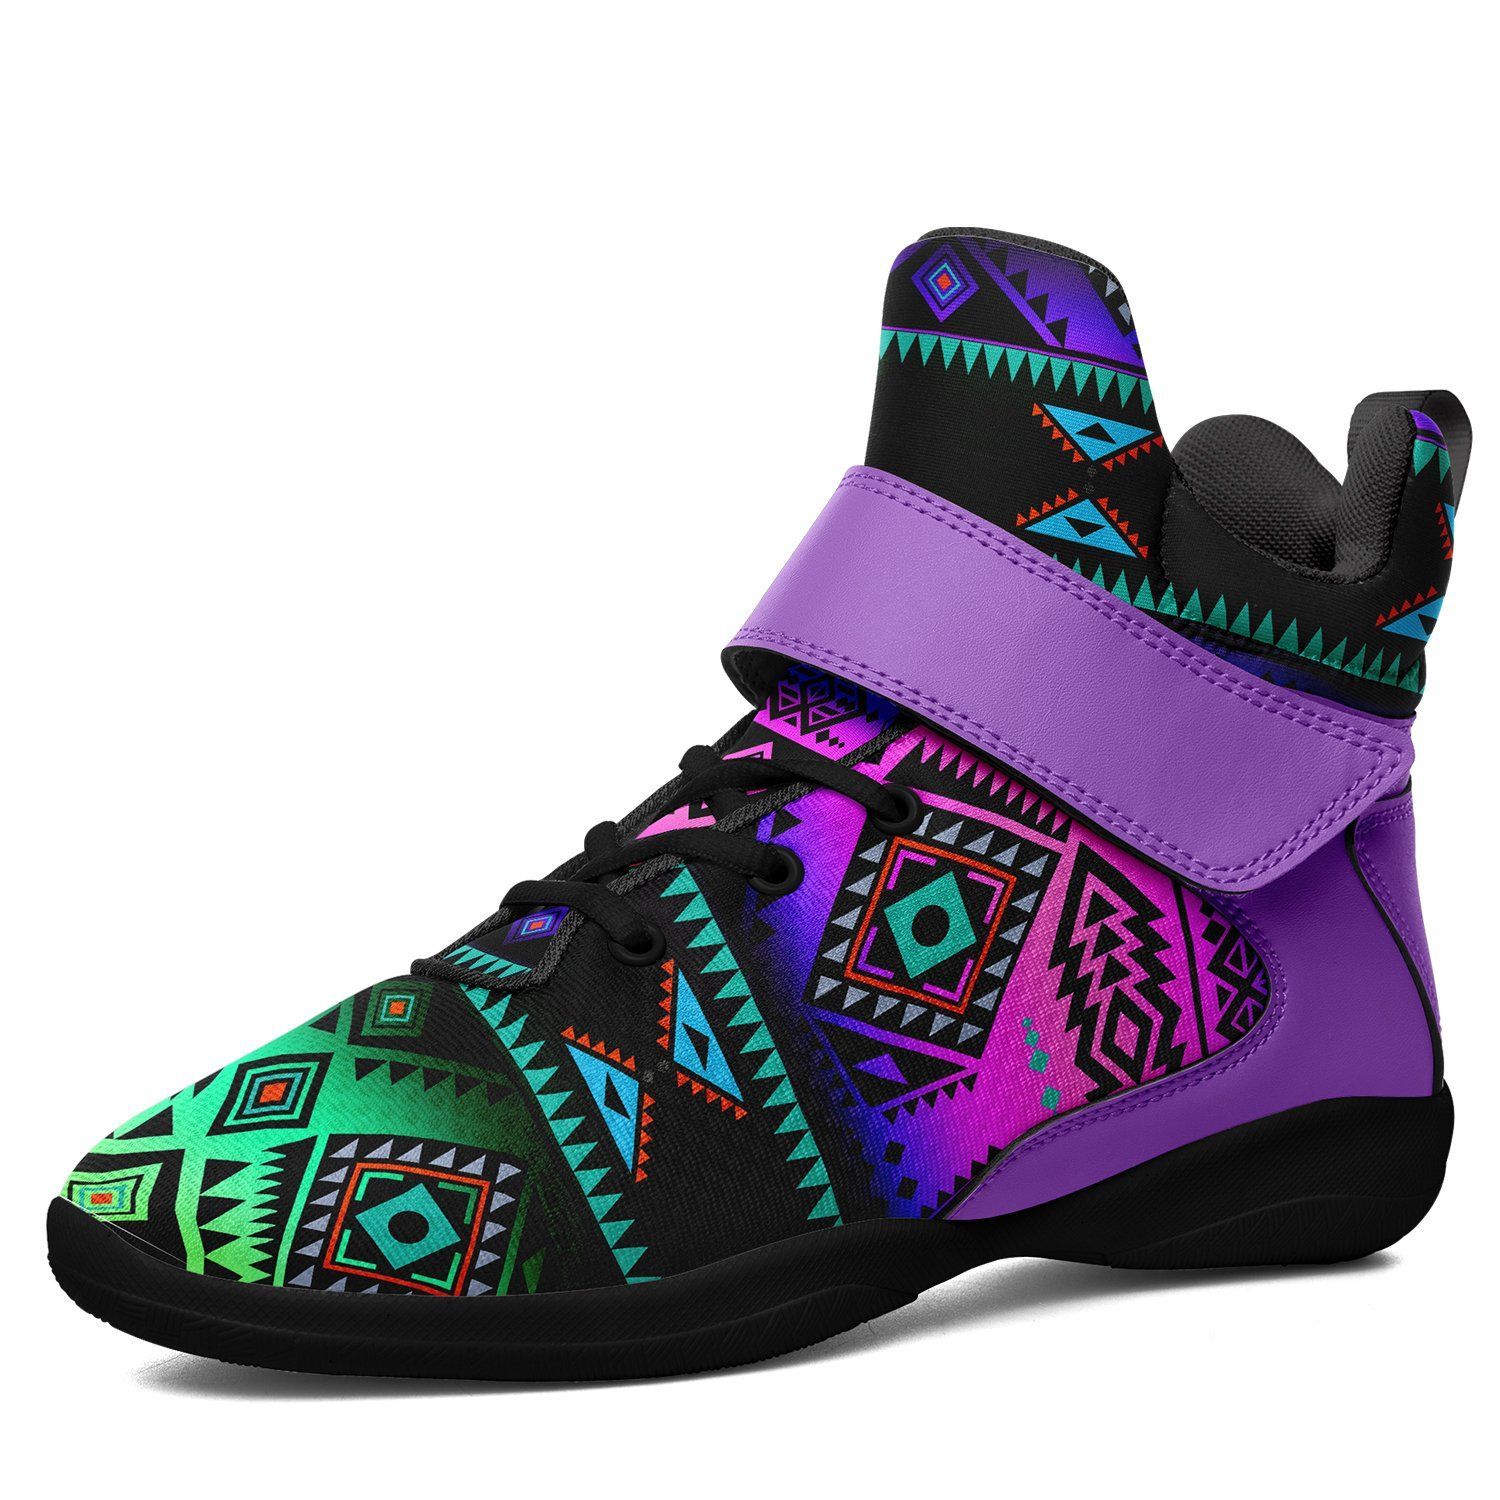 California Coast Sunrise Kid's Ipottaa Basketball / Sport High Top Shoes 49 Dzine US Women 4.5 / US Youth 3.5 / EUR 35 Black Sole with Lavender Strap 